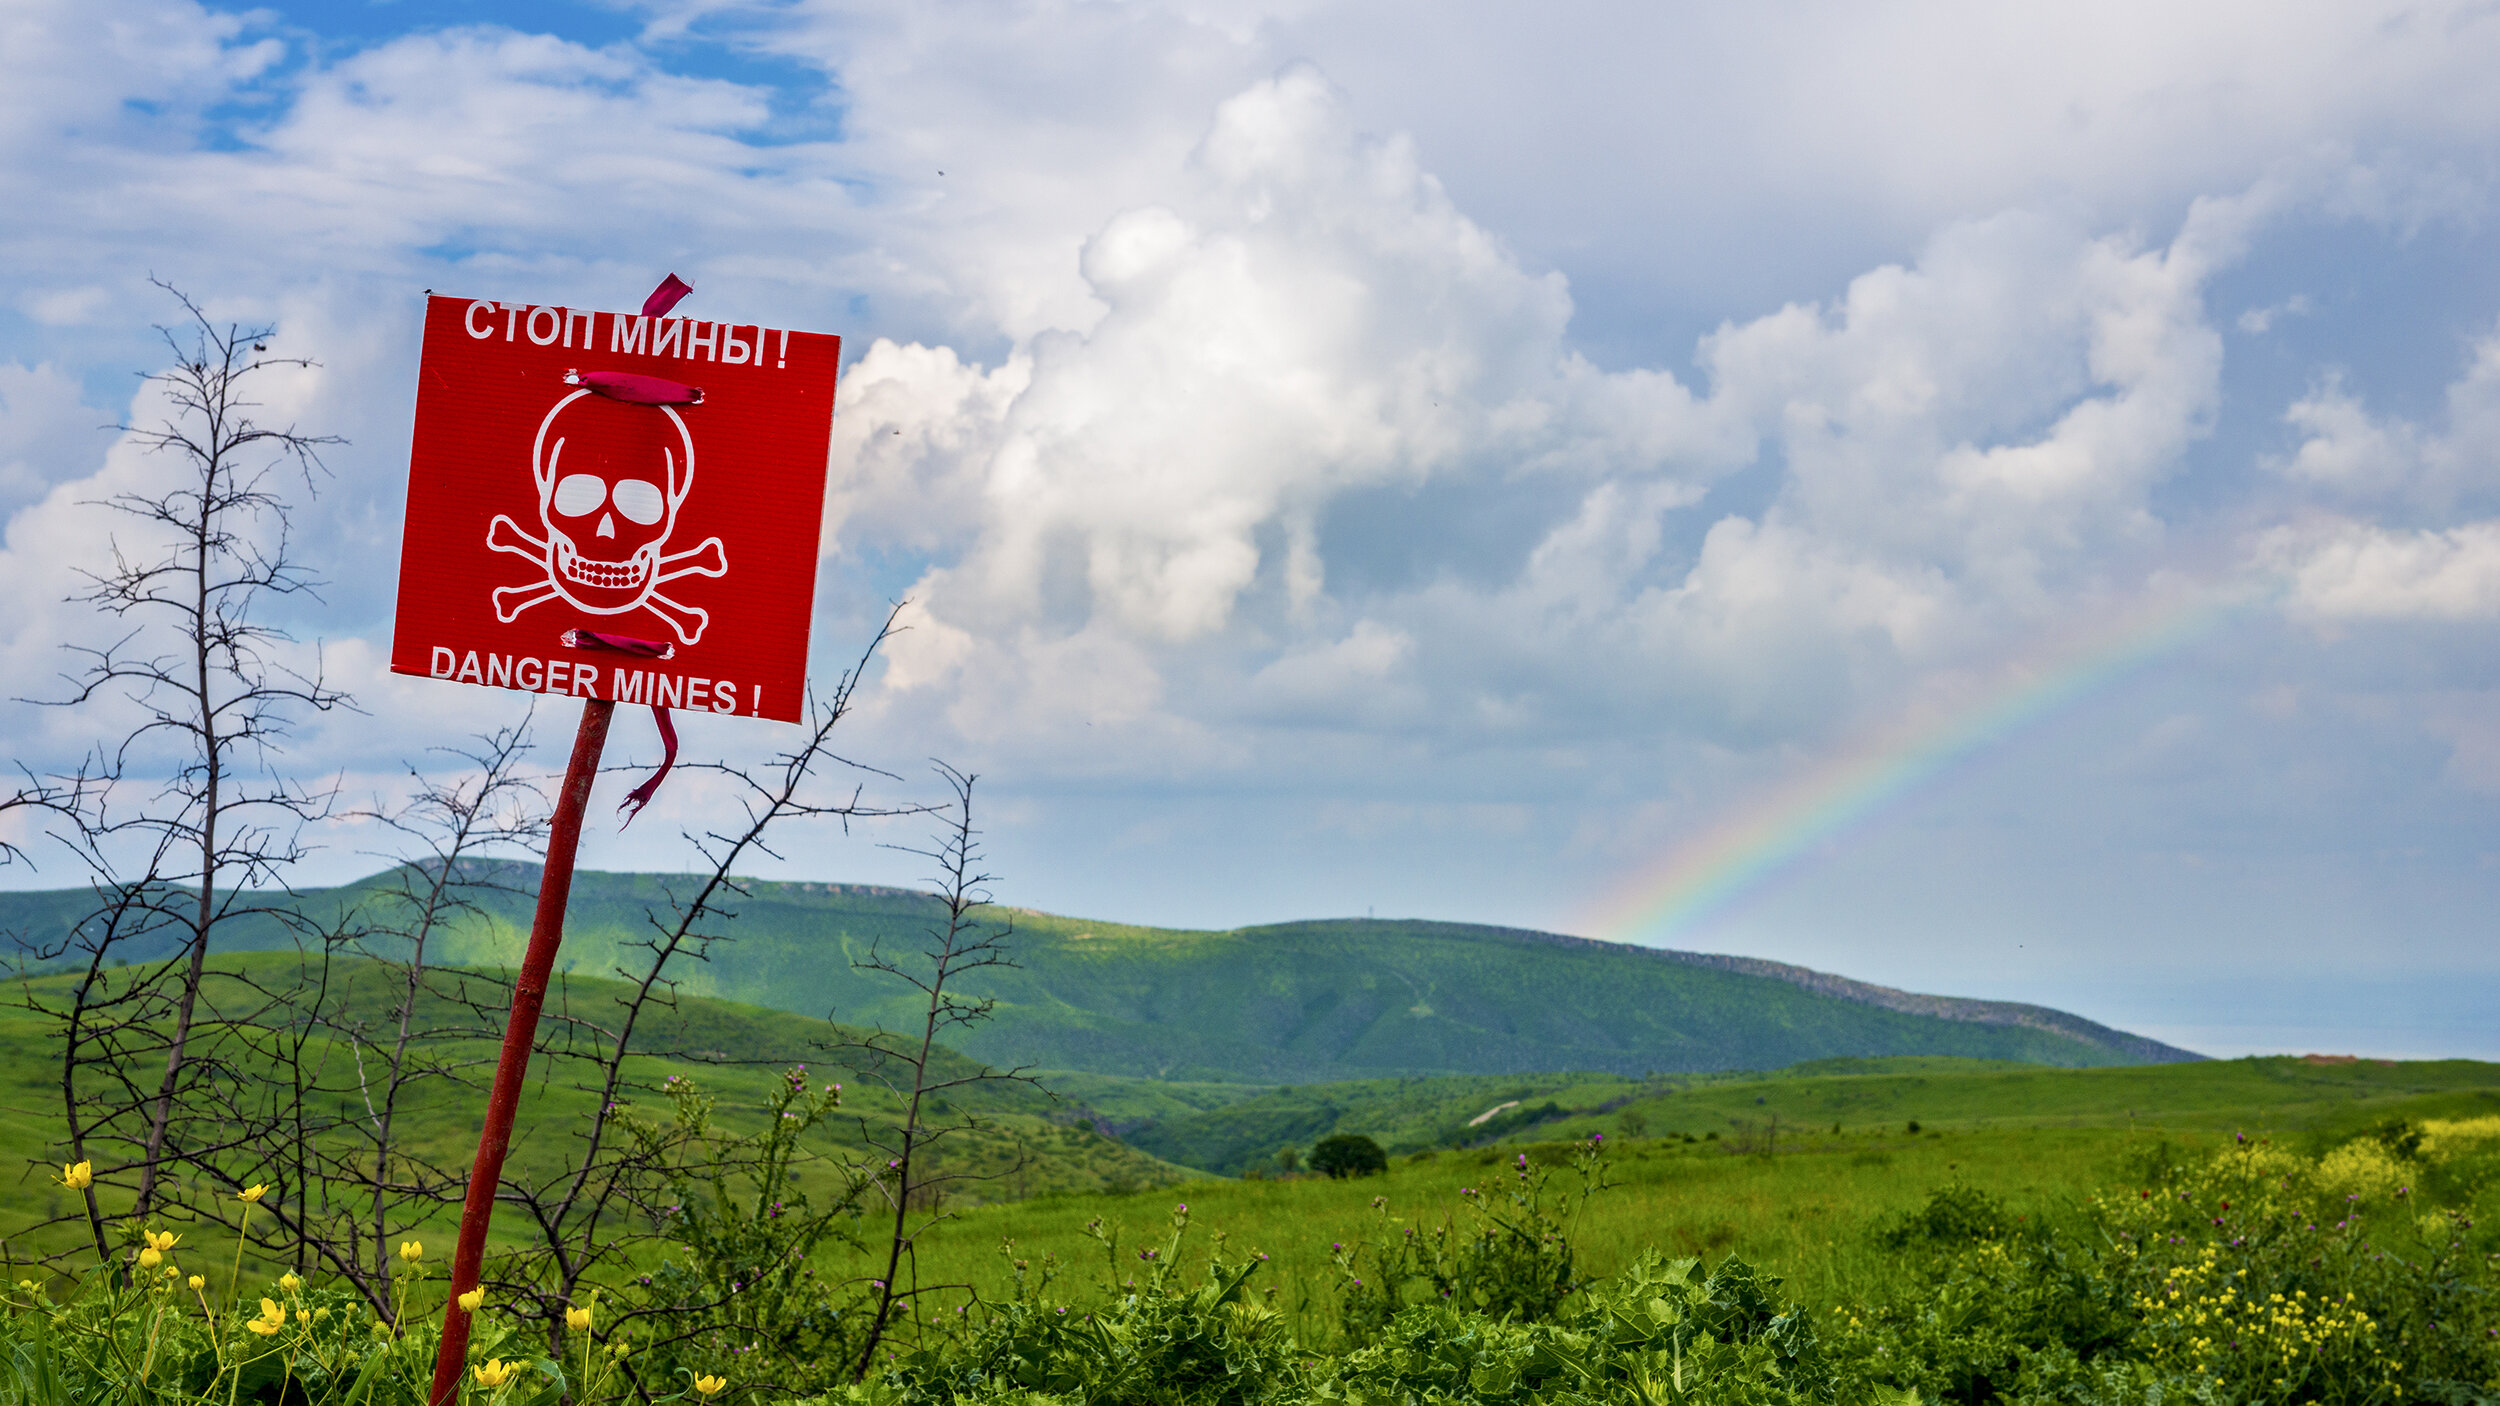  A sign in English and Russian warns of mines near Mokhratagh, Nagorno-Karabakh.  According to the HALO Trust, a U.S.-backed British de-mining nonprofit, 160mm rockets were fired into area fields during the Four-Day War.  Each rocket scattered 104 bo